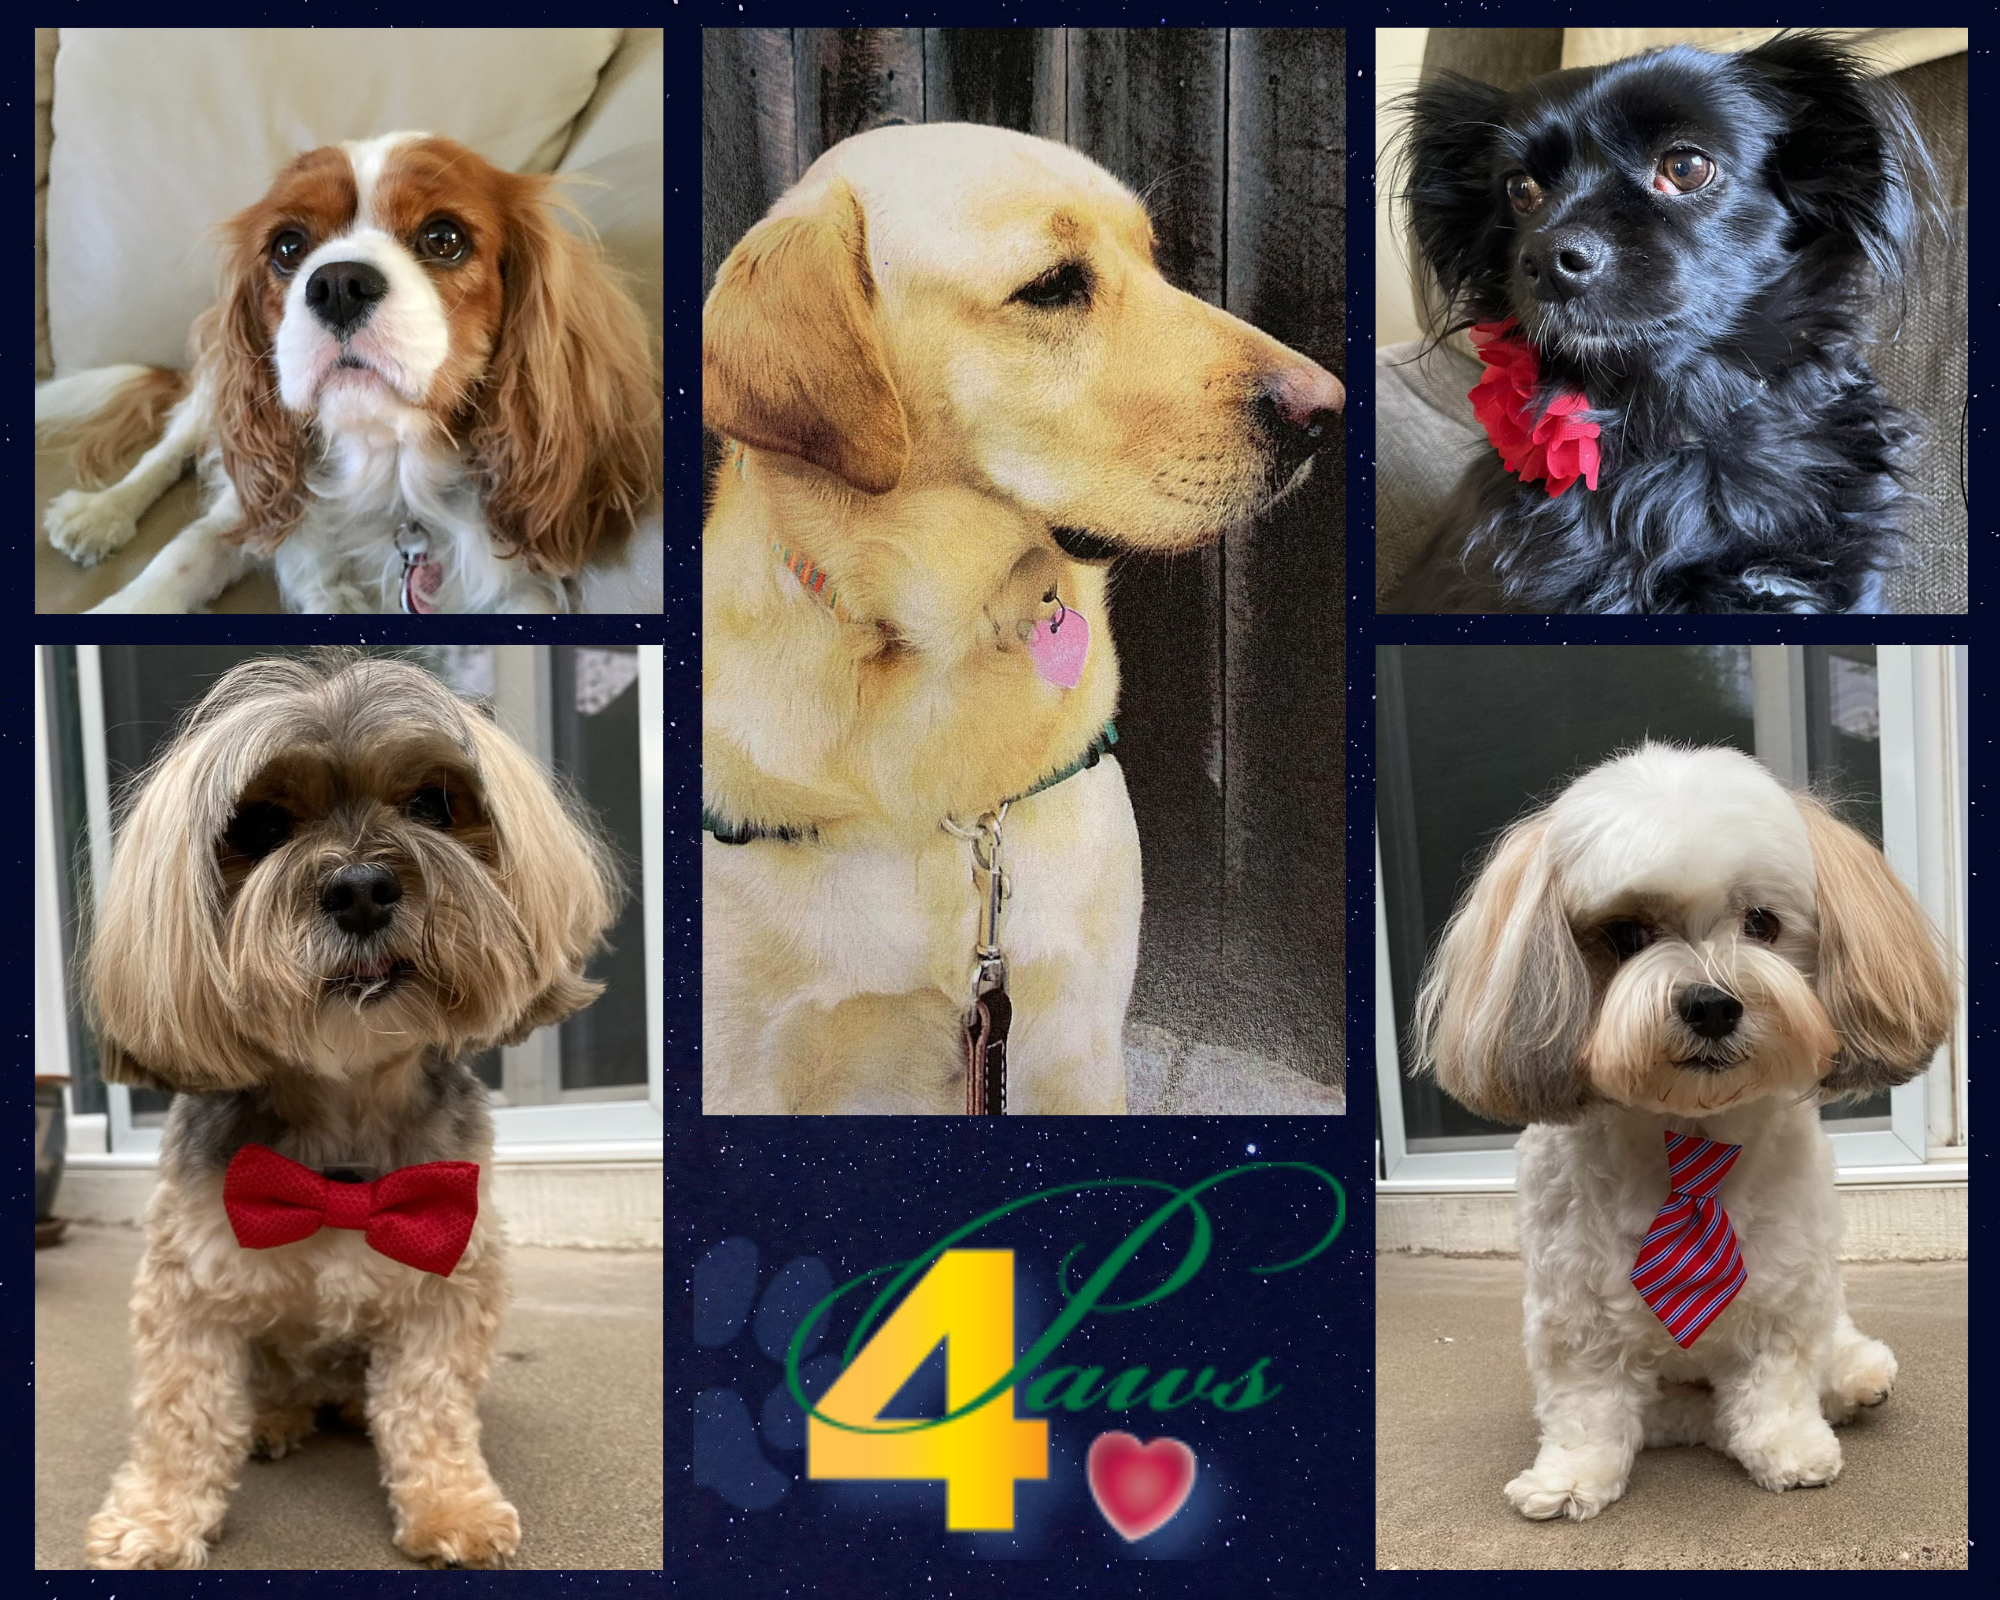 A grid of 5 dogs, some wearing bow ties. The logo 4 Paws is featured.